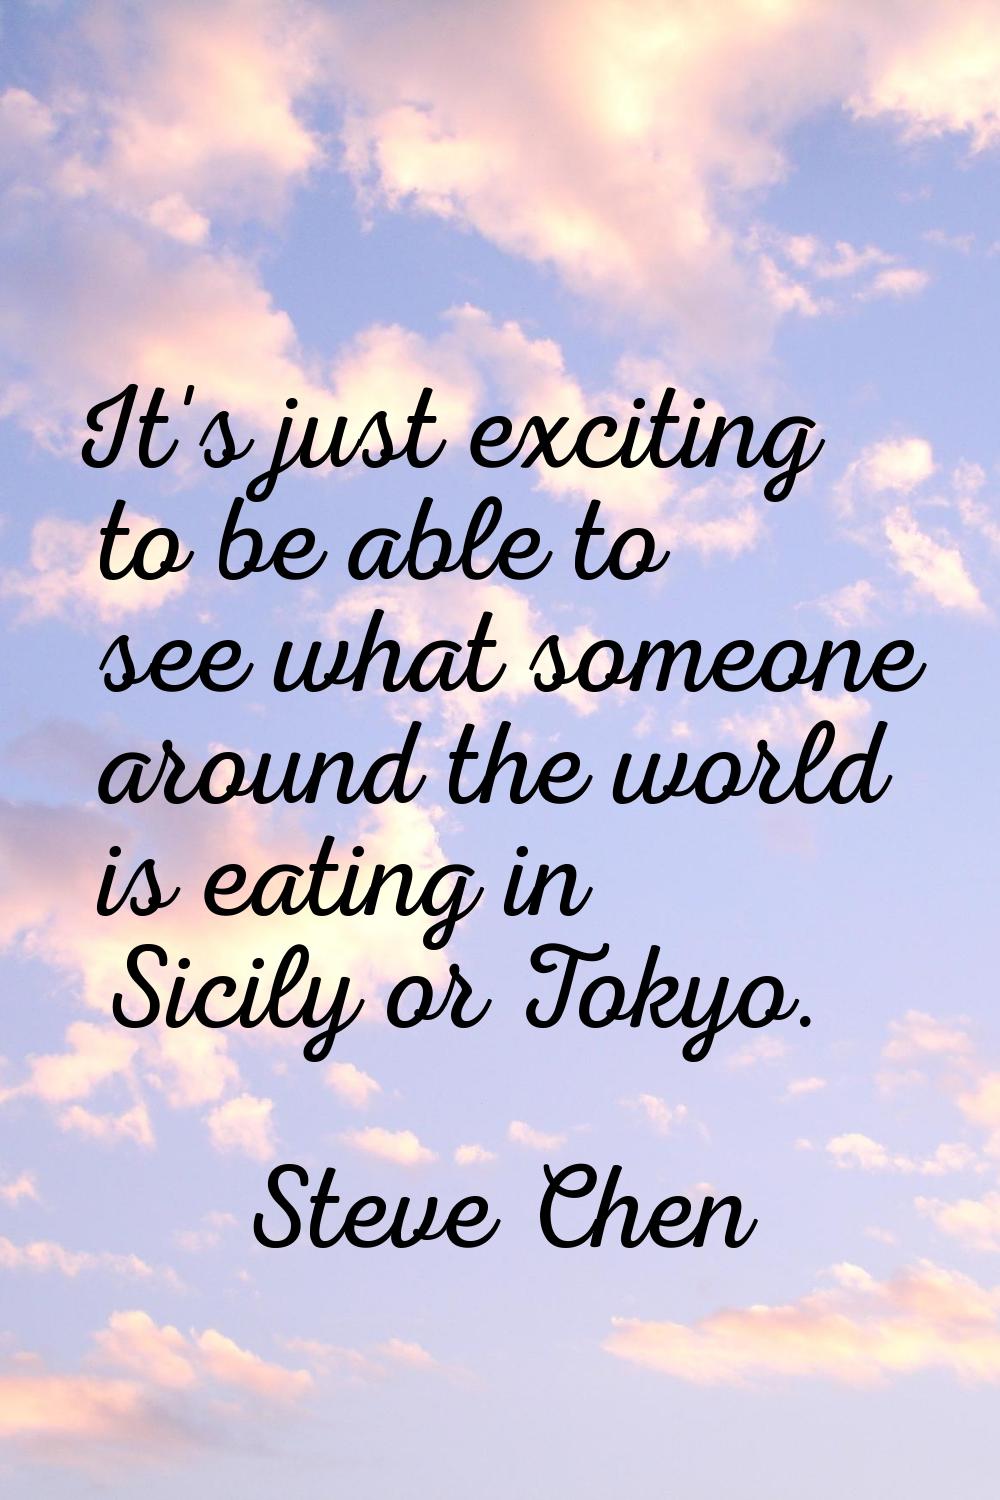 It's just exciting to be able to see what someone around the world is eating in Sicily or Tokyo.